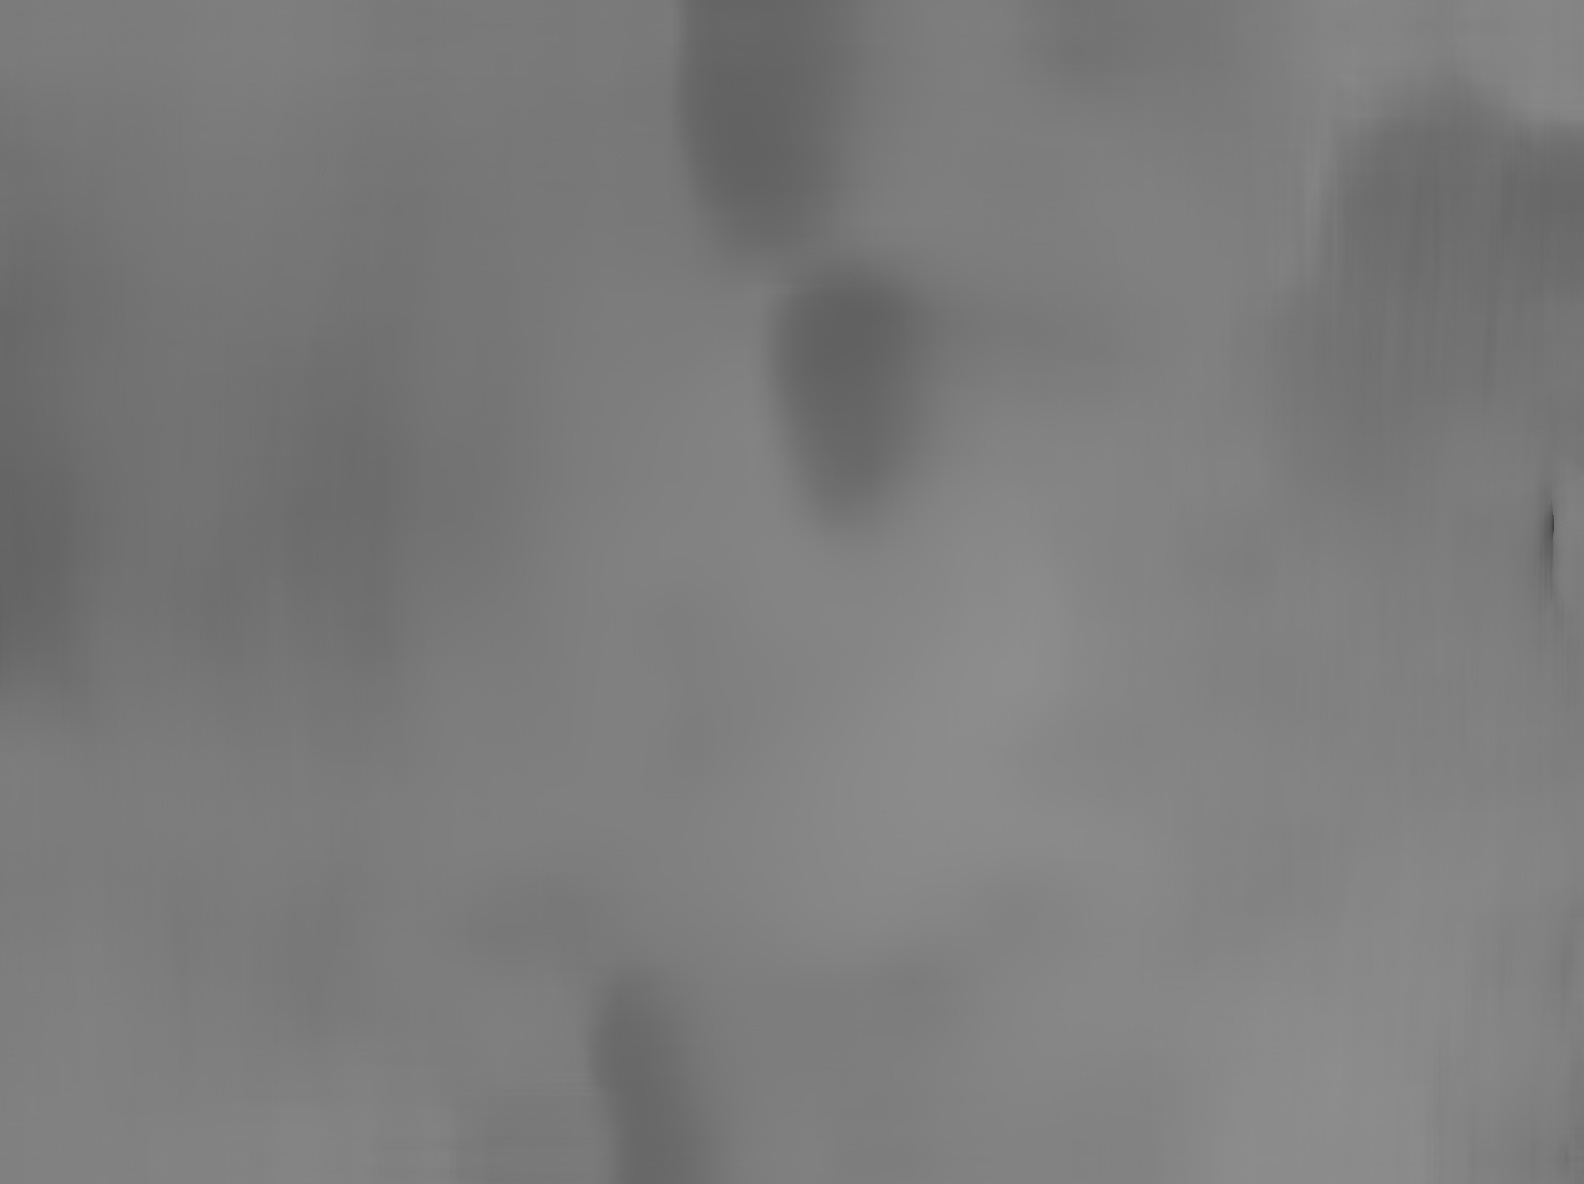 Nasa's Mars rover Curiosity acquired this image using its Mars Hand Lens Imager (MAHLI) on Sol 2426